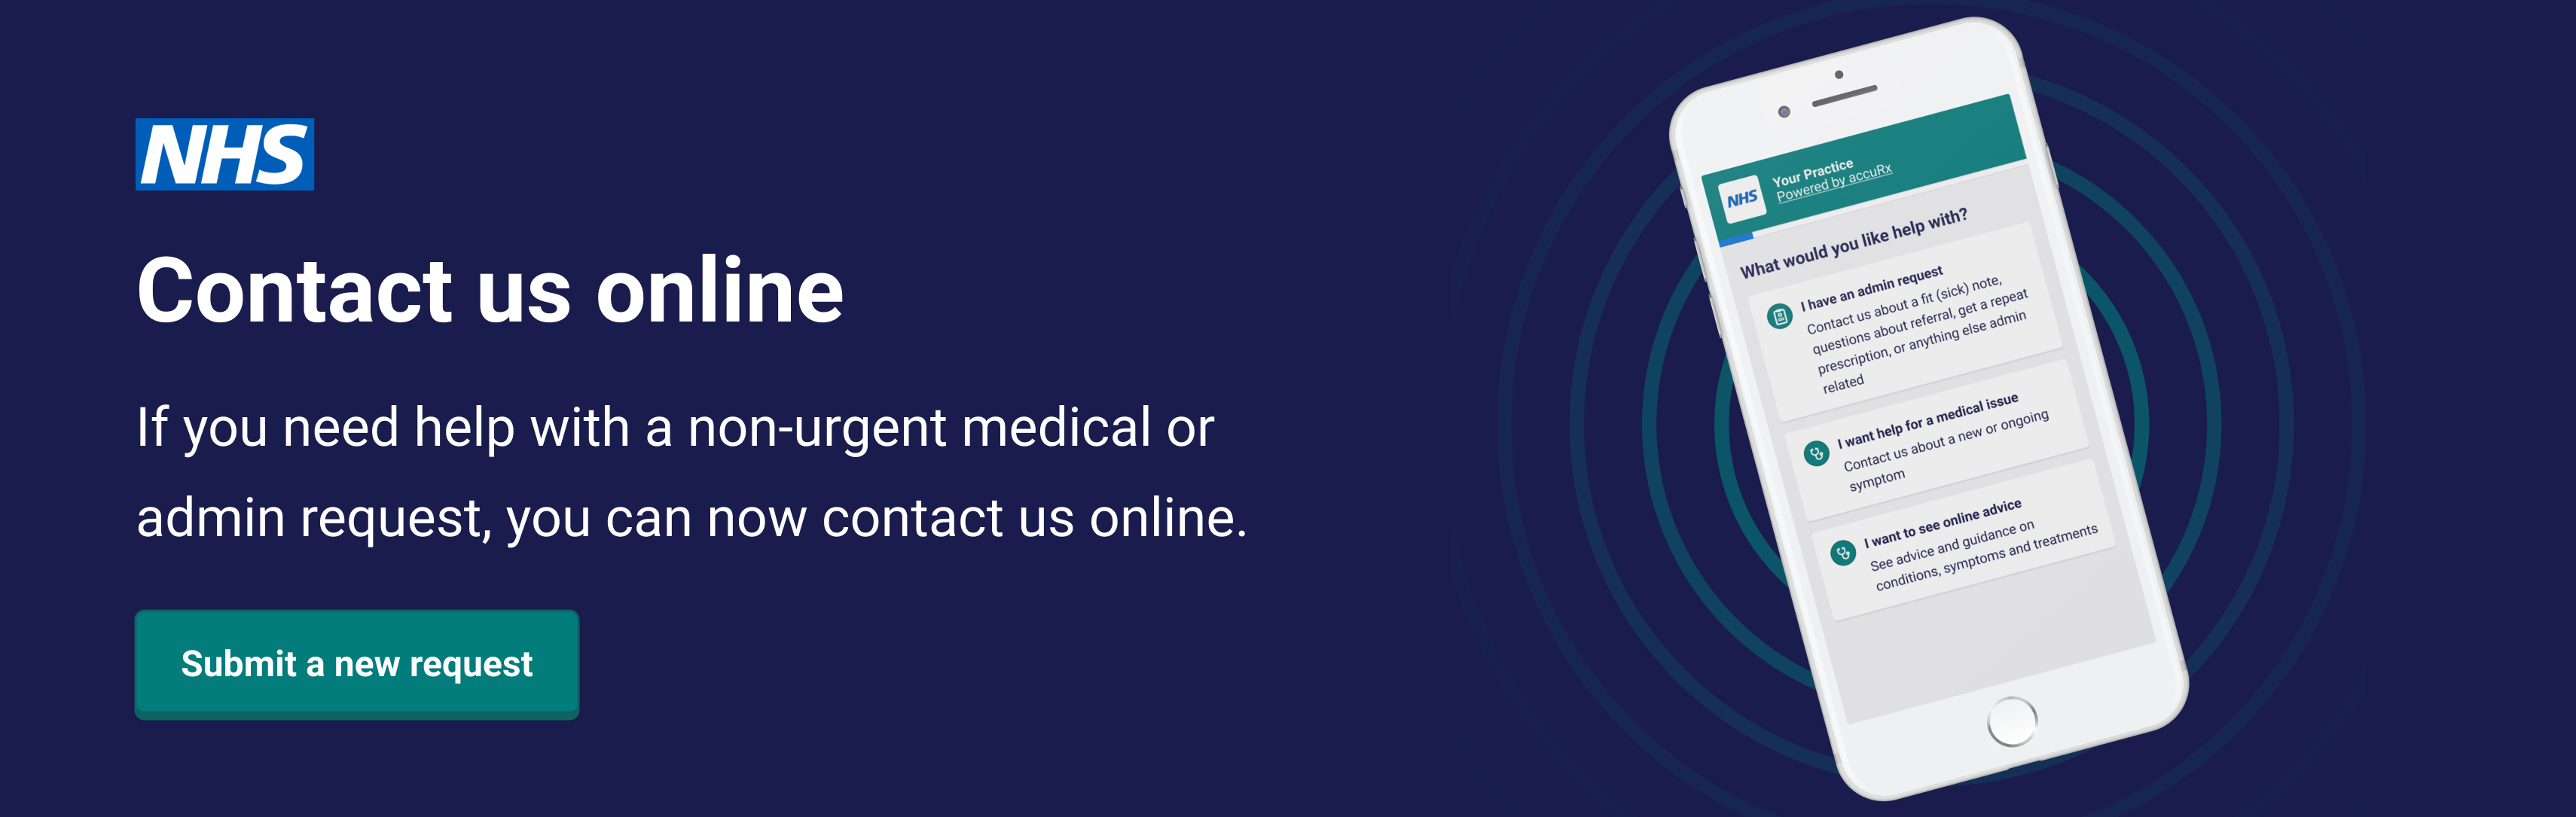 contact your gp online using an online form